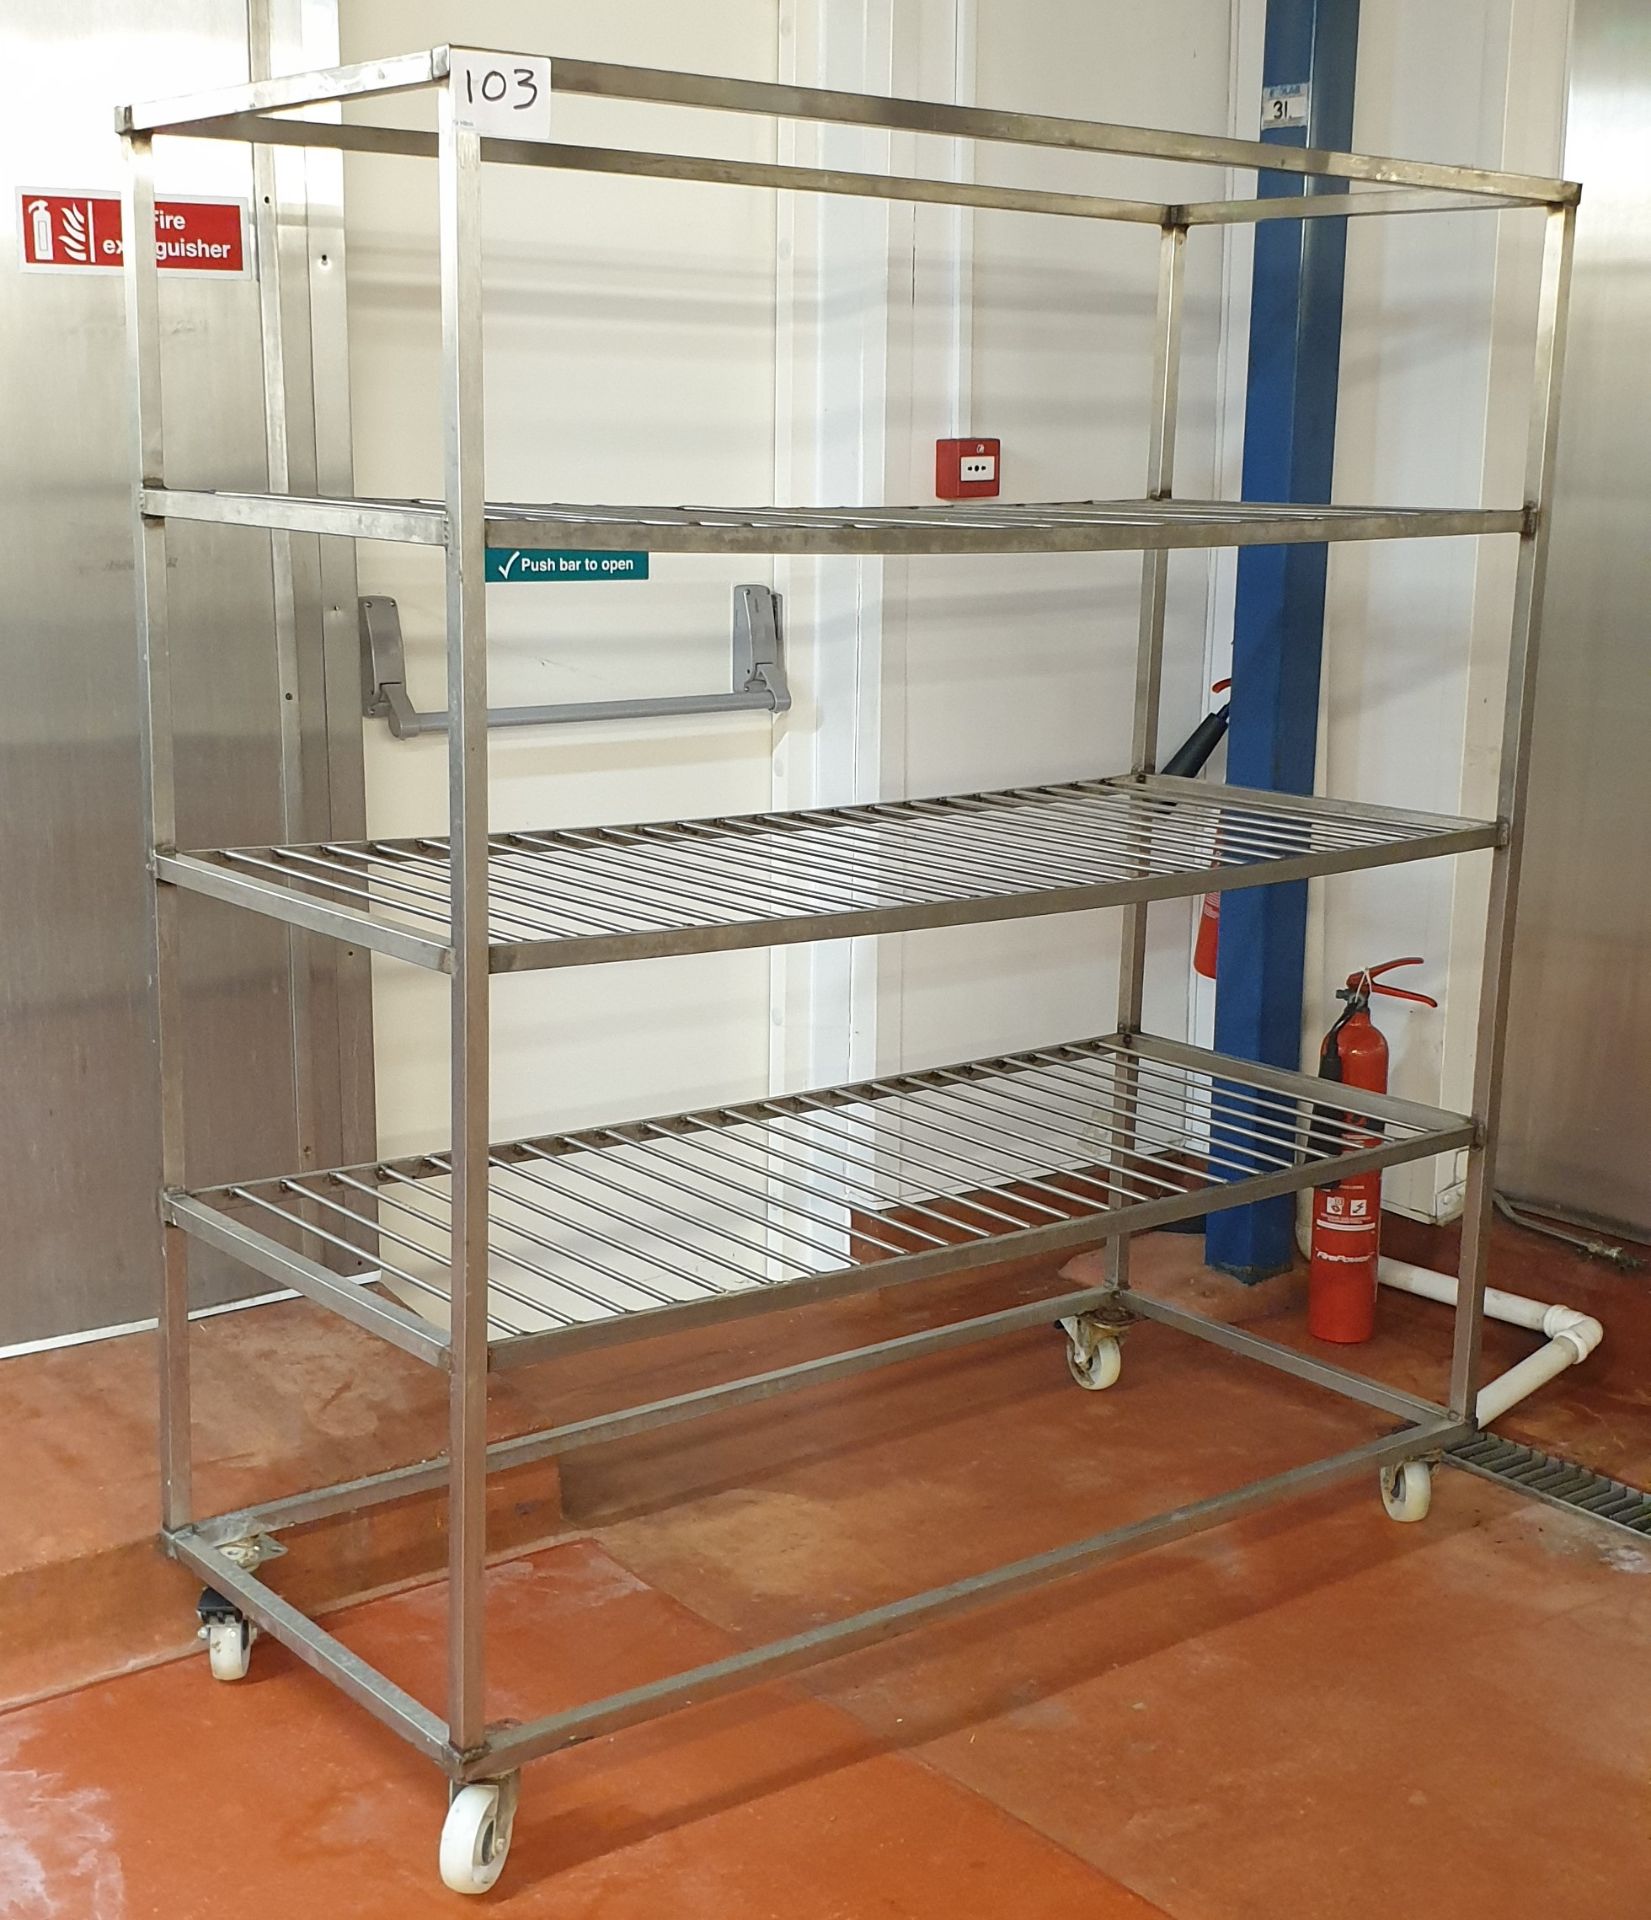 Stainless Steel 3-Tier Mobile Racking, 1.50m(l) x 0.85m(w) x 1.67m(h) - Image 2 of 2